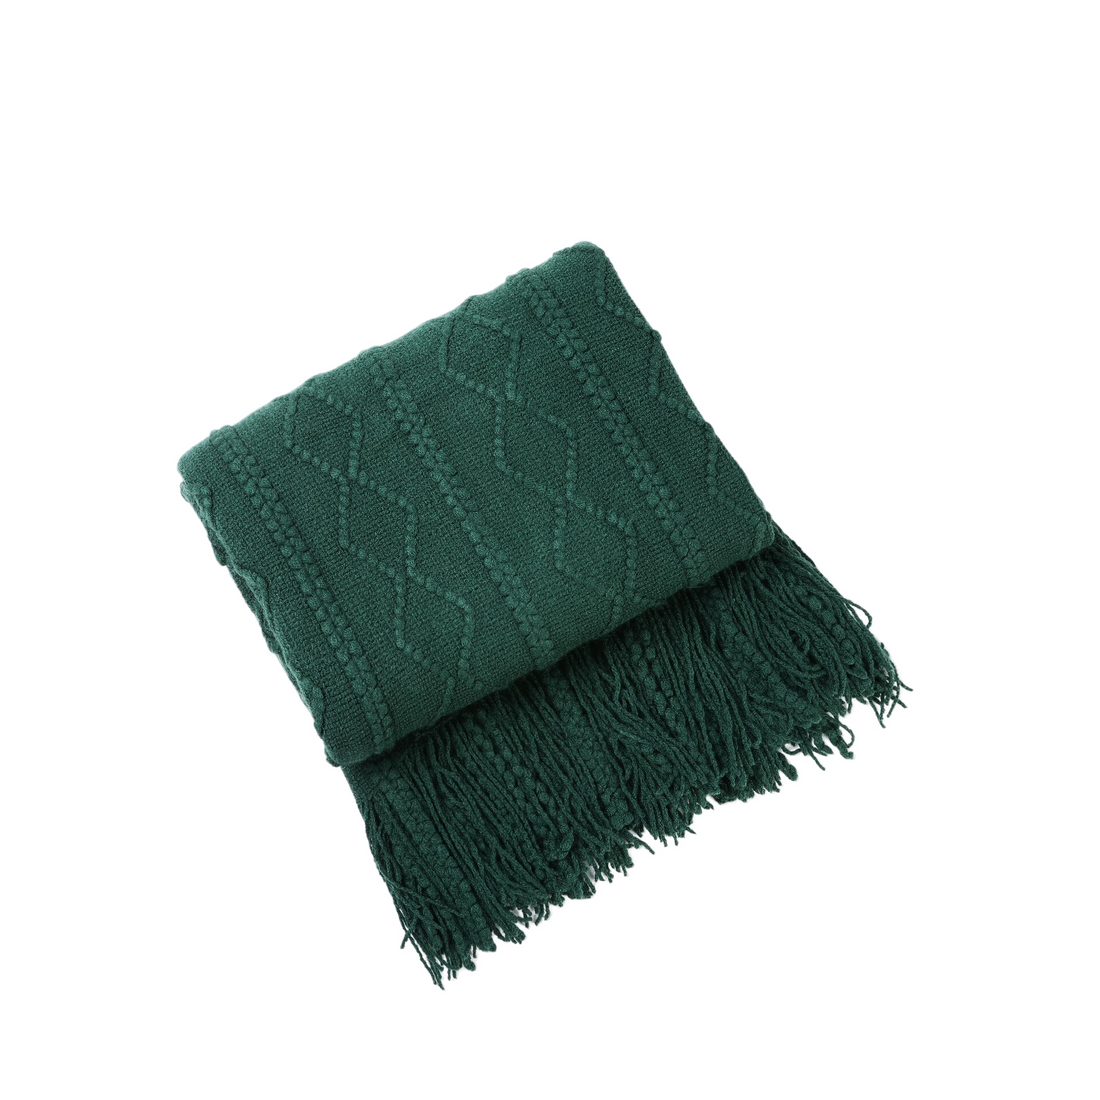 Anyhouz Green Throw Blanket Faux Cashmere Sofa Cover Vertical Bar Diamond Knit Plaid Tassels Blanket for Spring Summer 130*180cm-Blankets-PEROZ Accessories